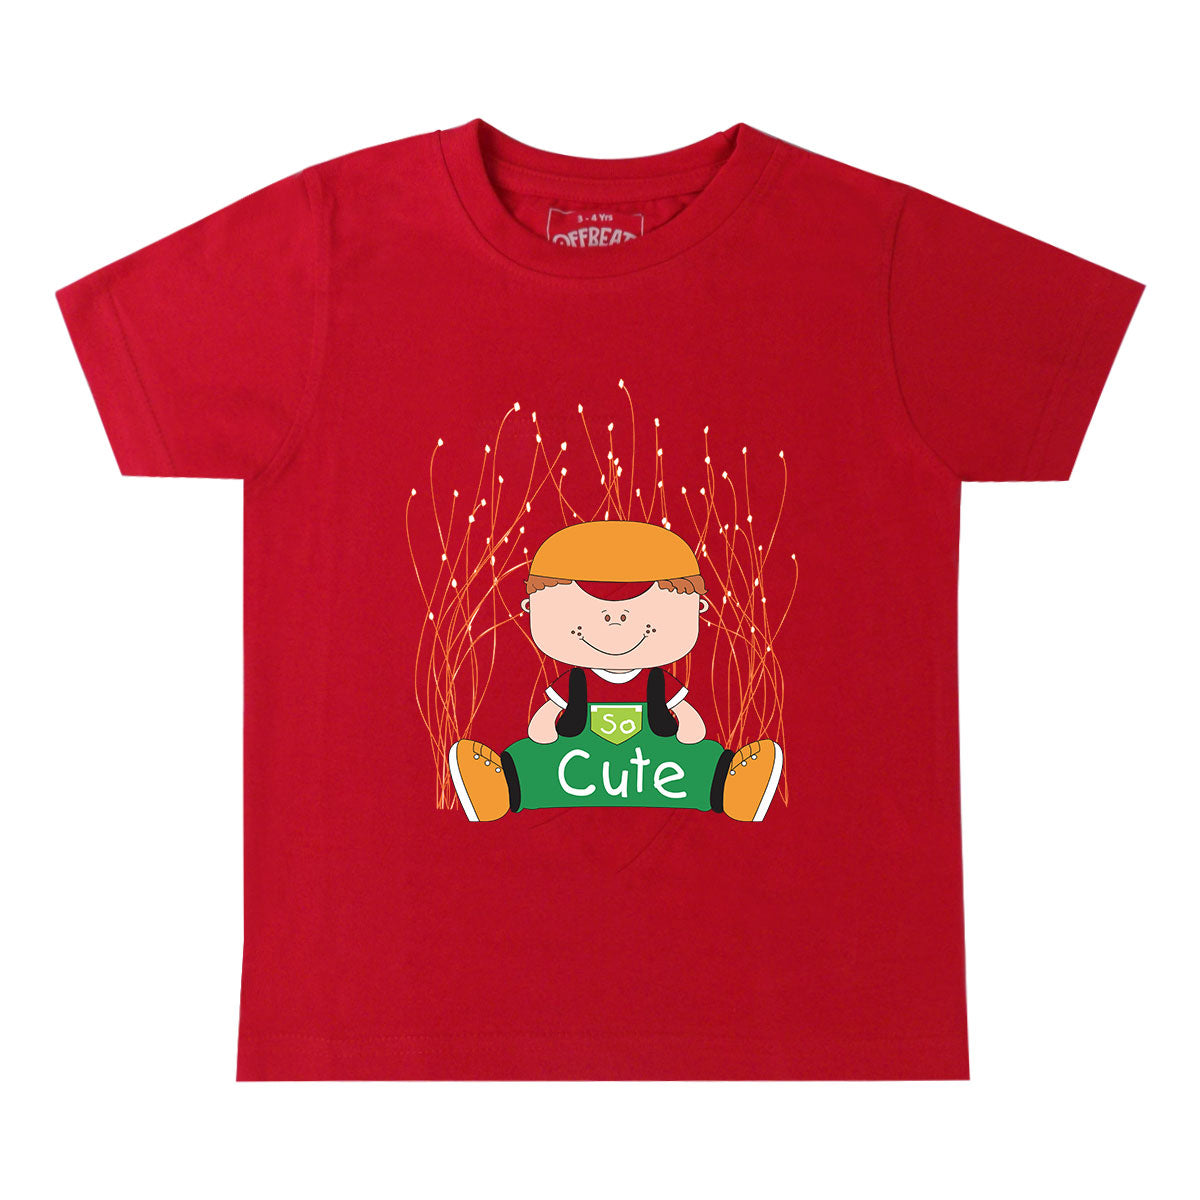 Cute - Premium Round Neck Cotton Tees for Kids - Red